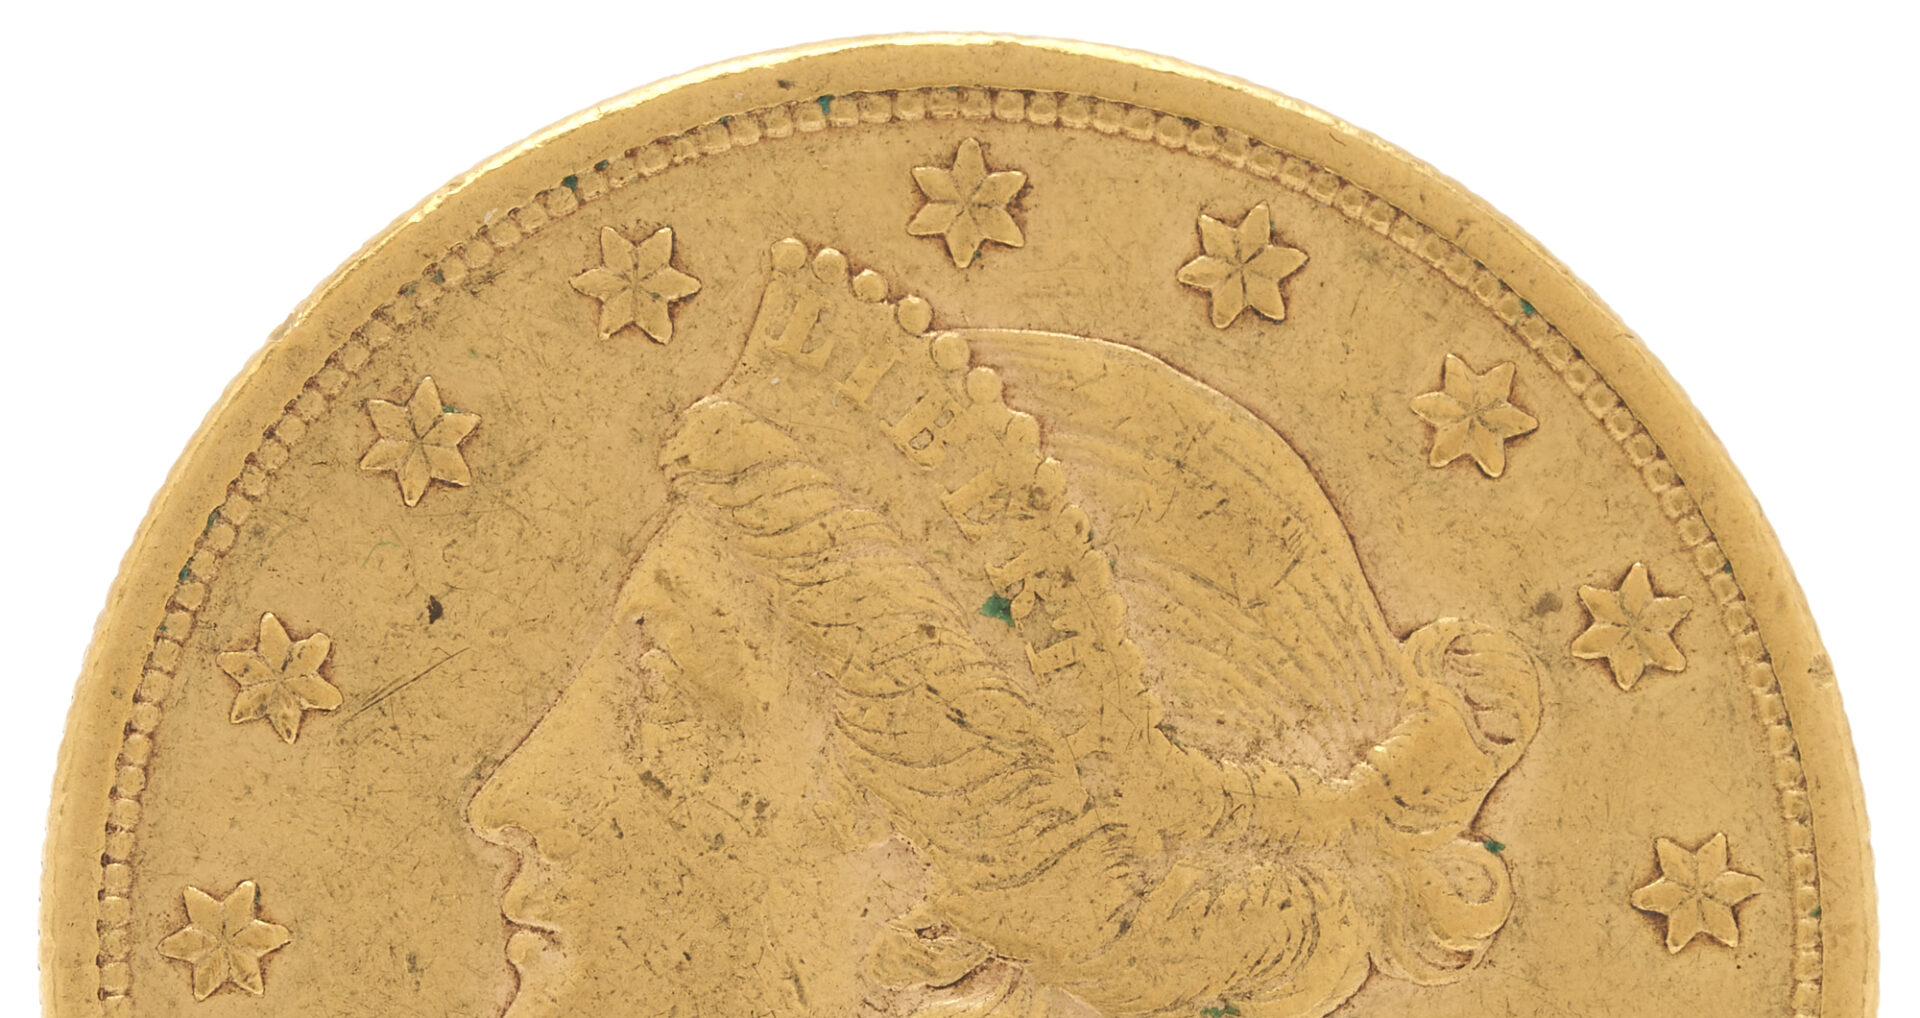 Lot 603: 1890 US $20 Liberty Head Gold Coin